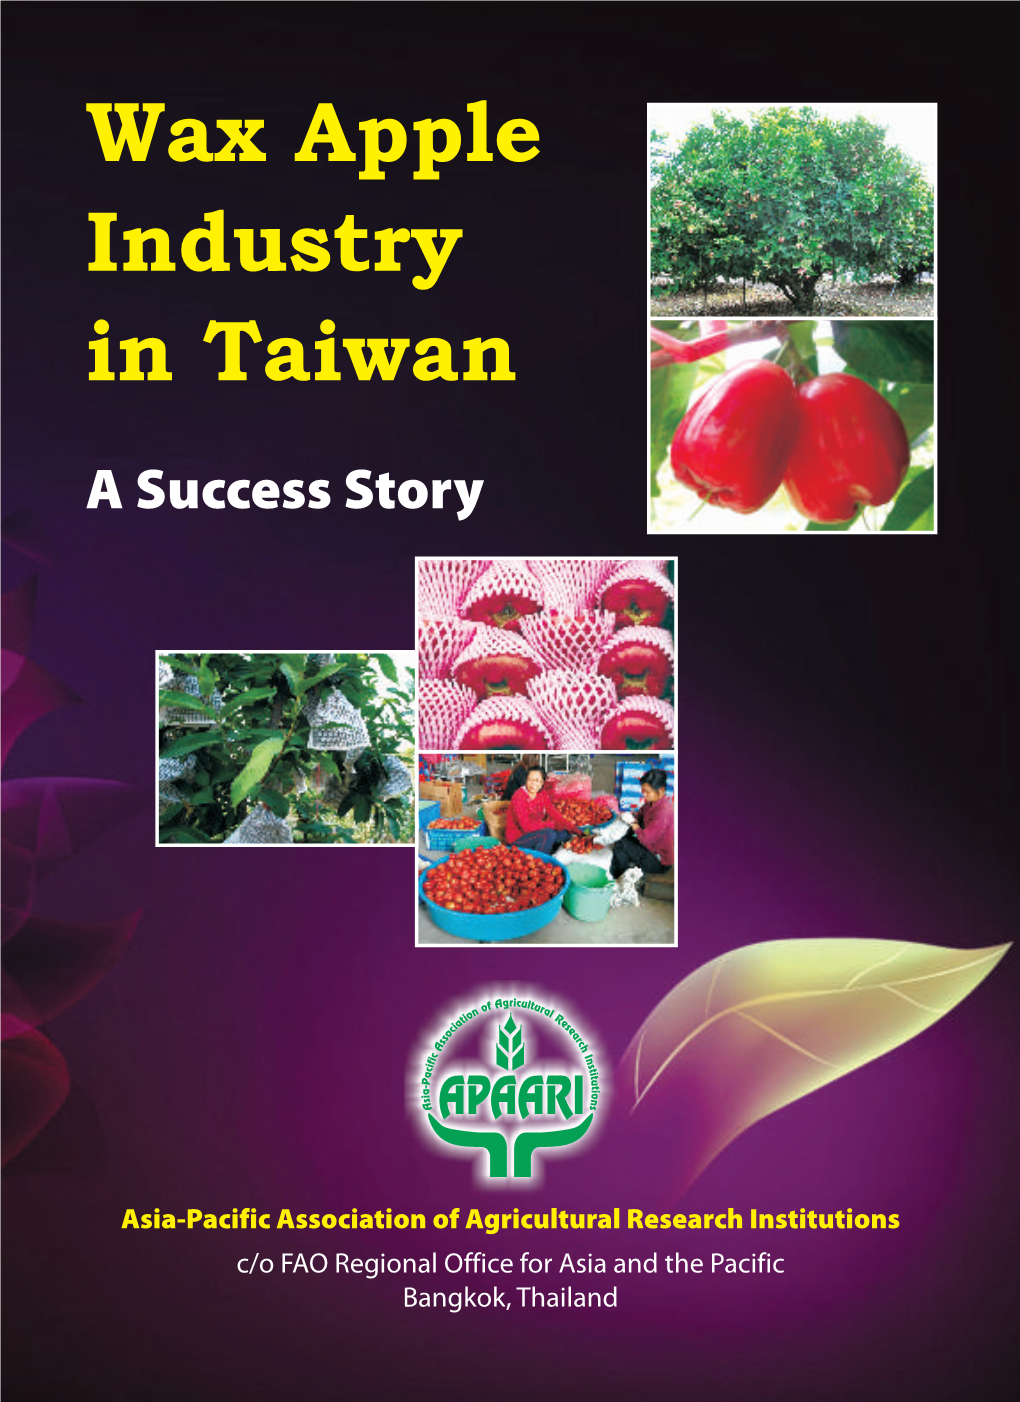 Wax Apple Industry in Taiwan a Success Story